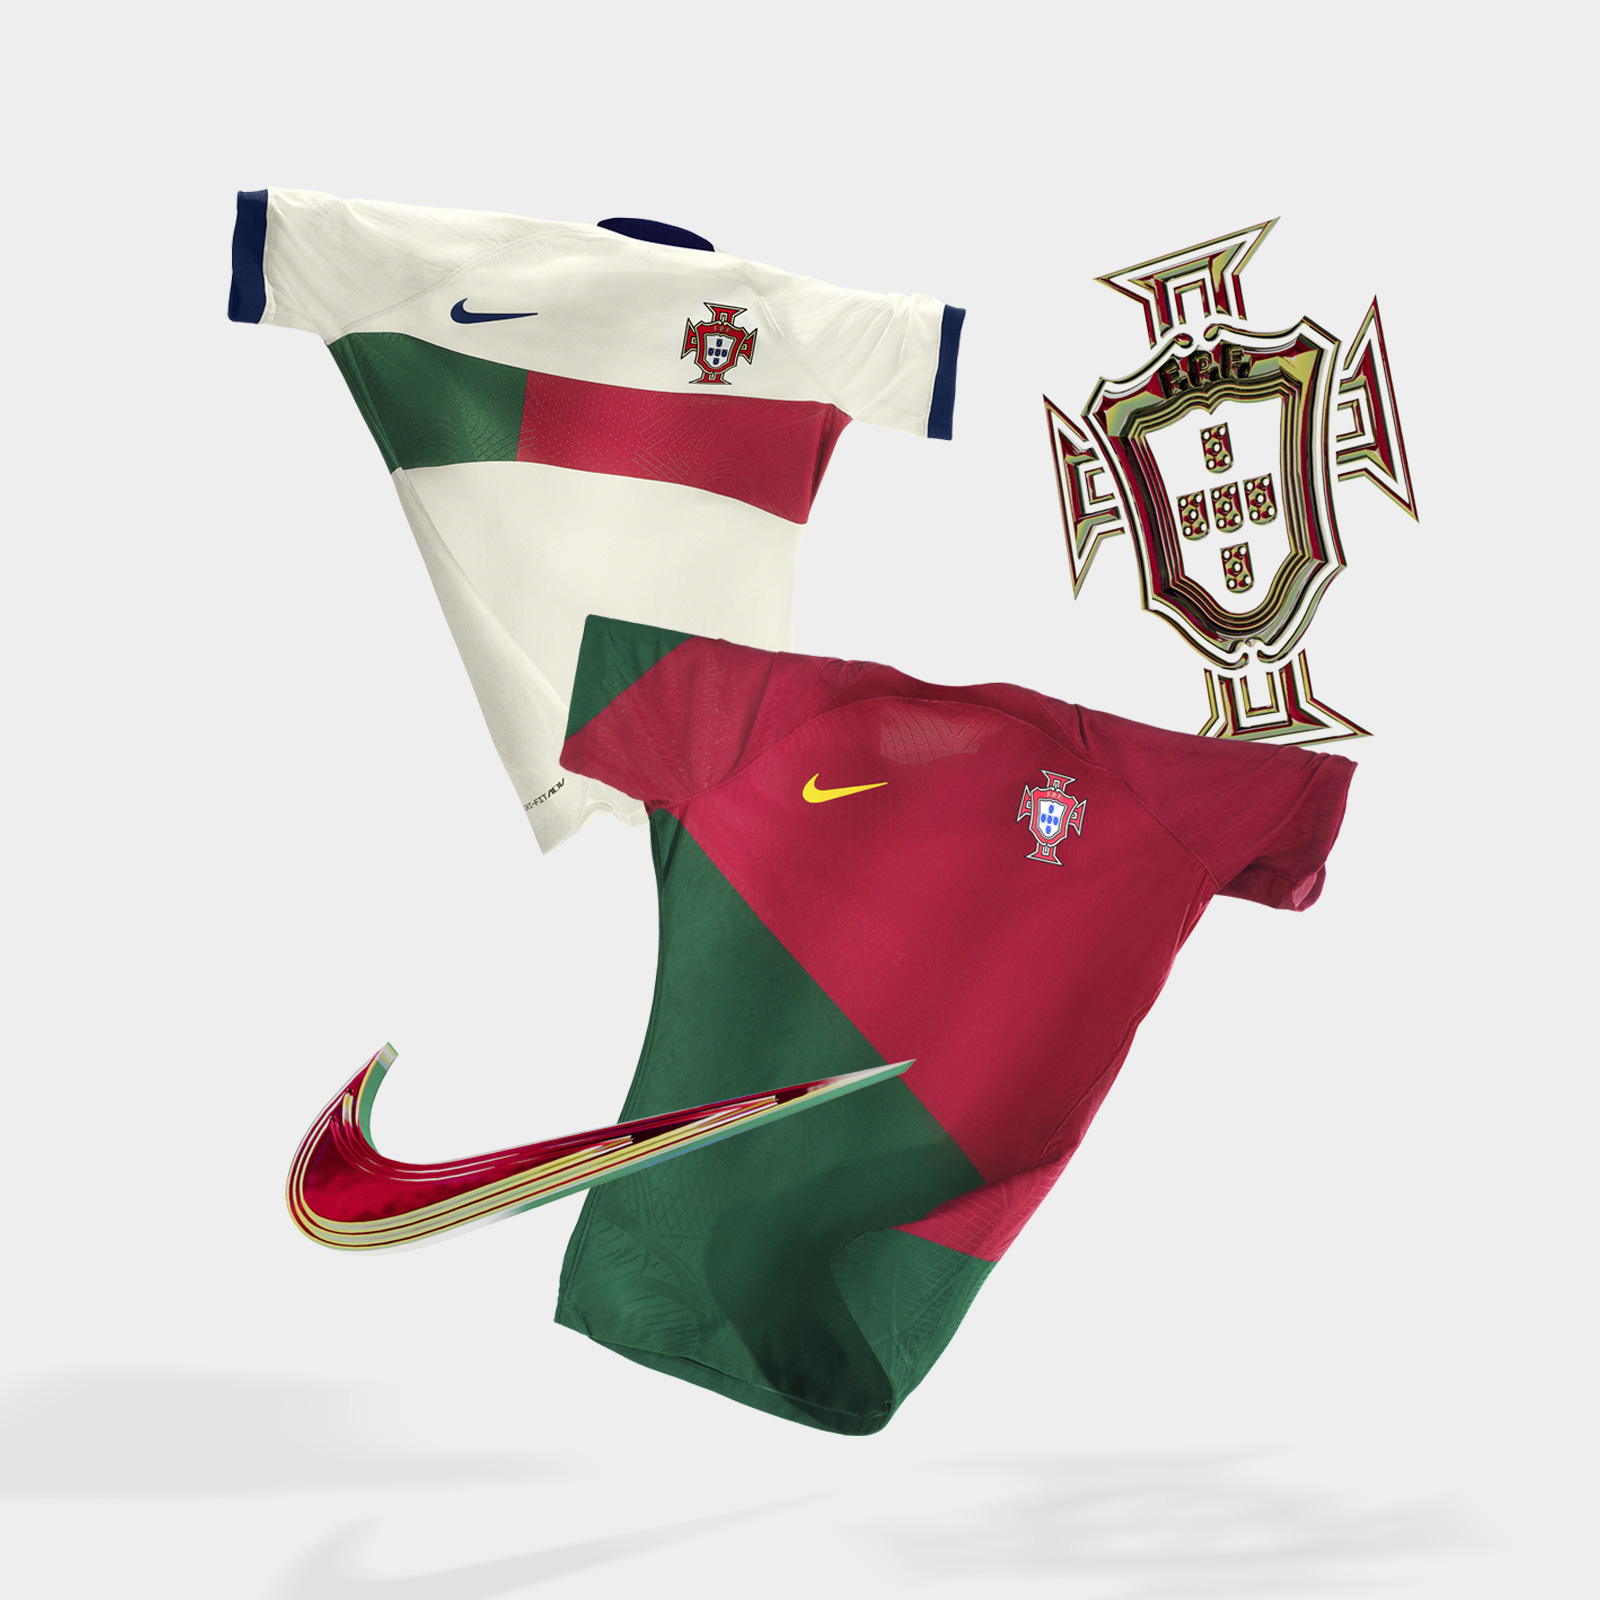 Nike Reveal Brand New 2022 FIFA World Cup Kits! 